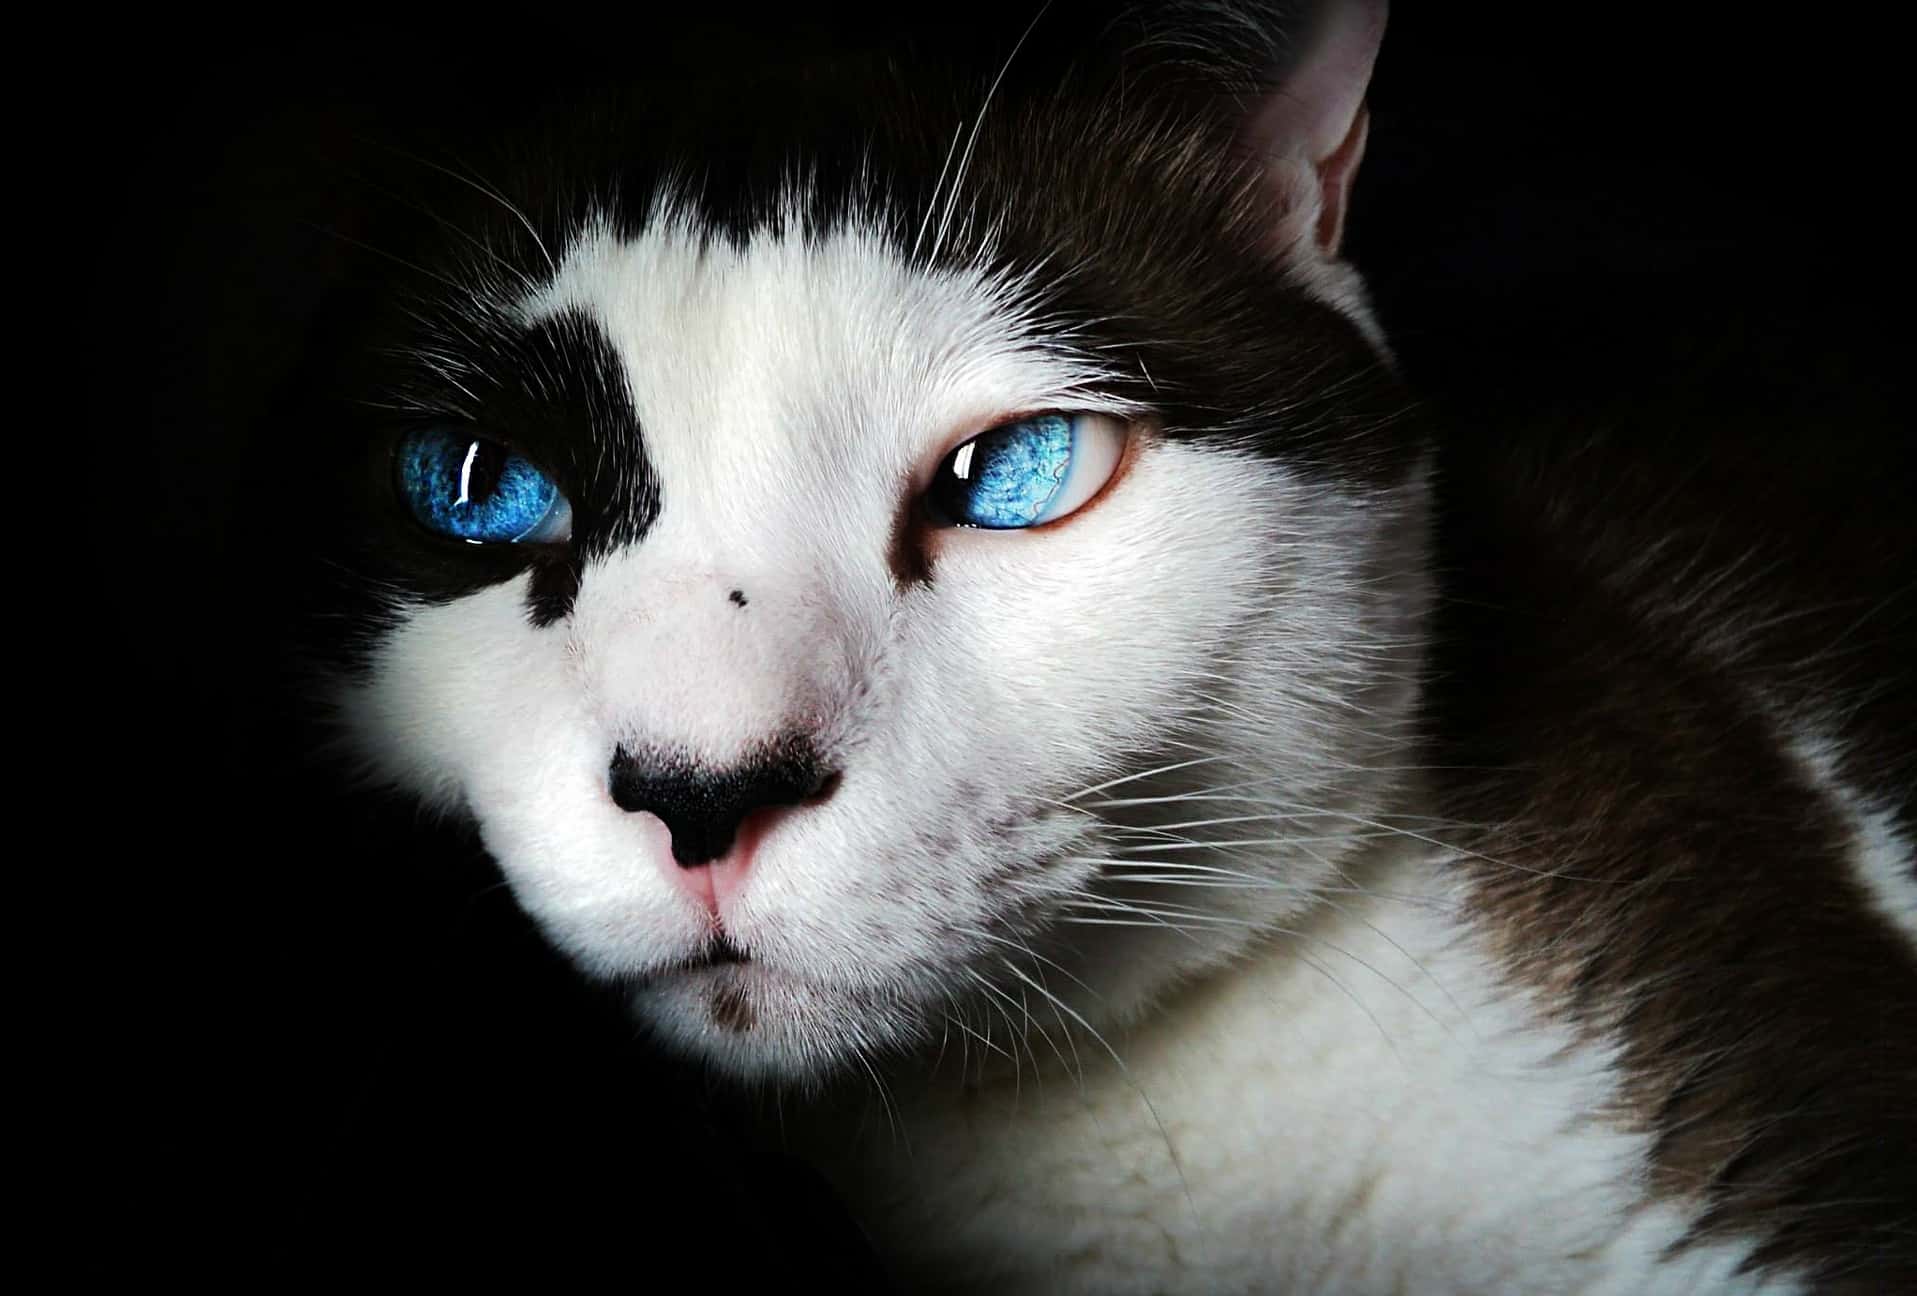 black and white cat with blue eyes